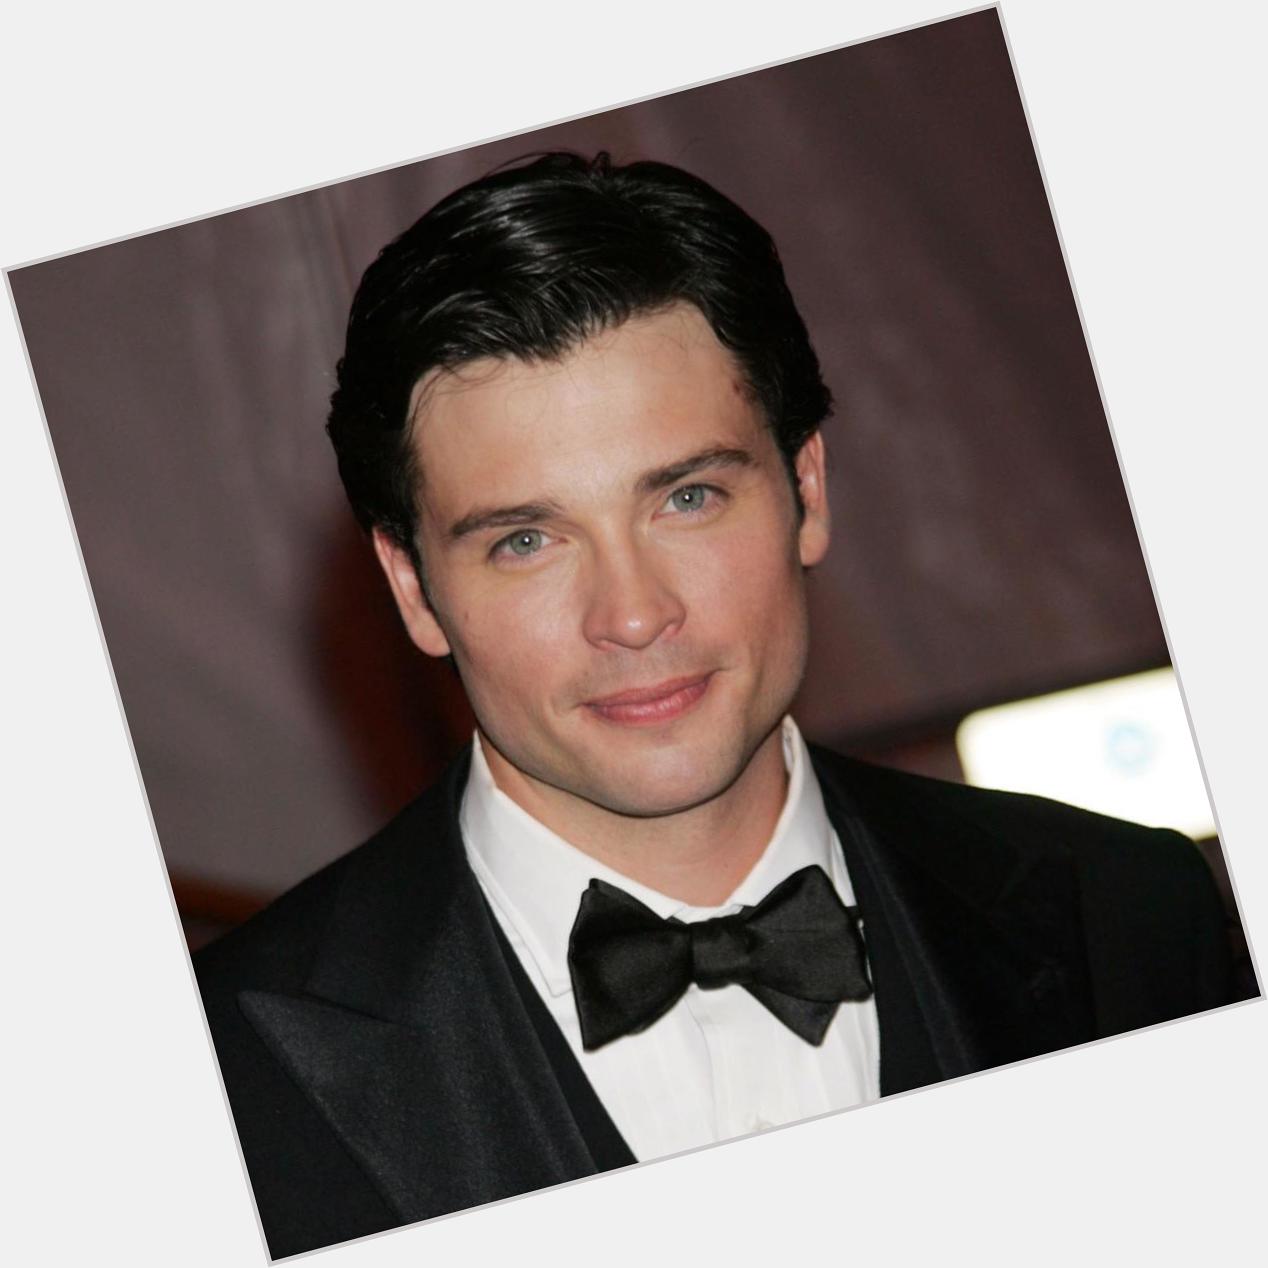 Happy birthday to this sexy piece of man The best Superman (besides Christopher Reeve), Tom Welling    